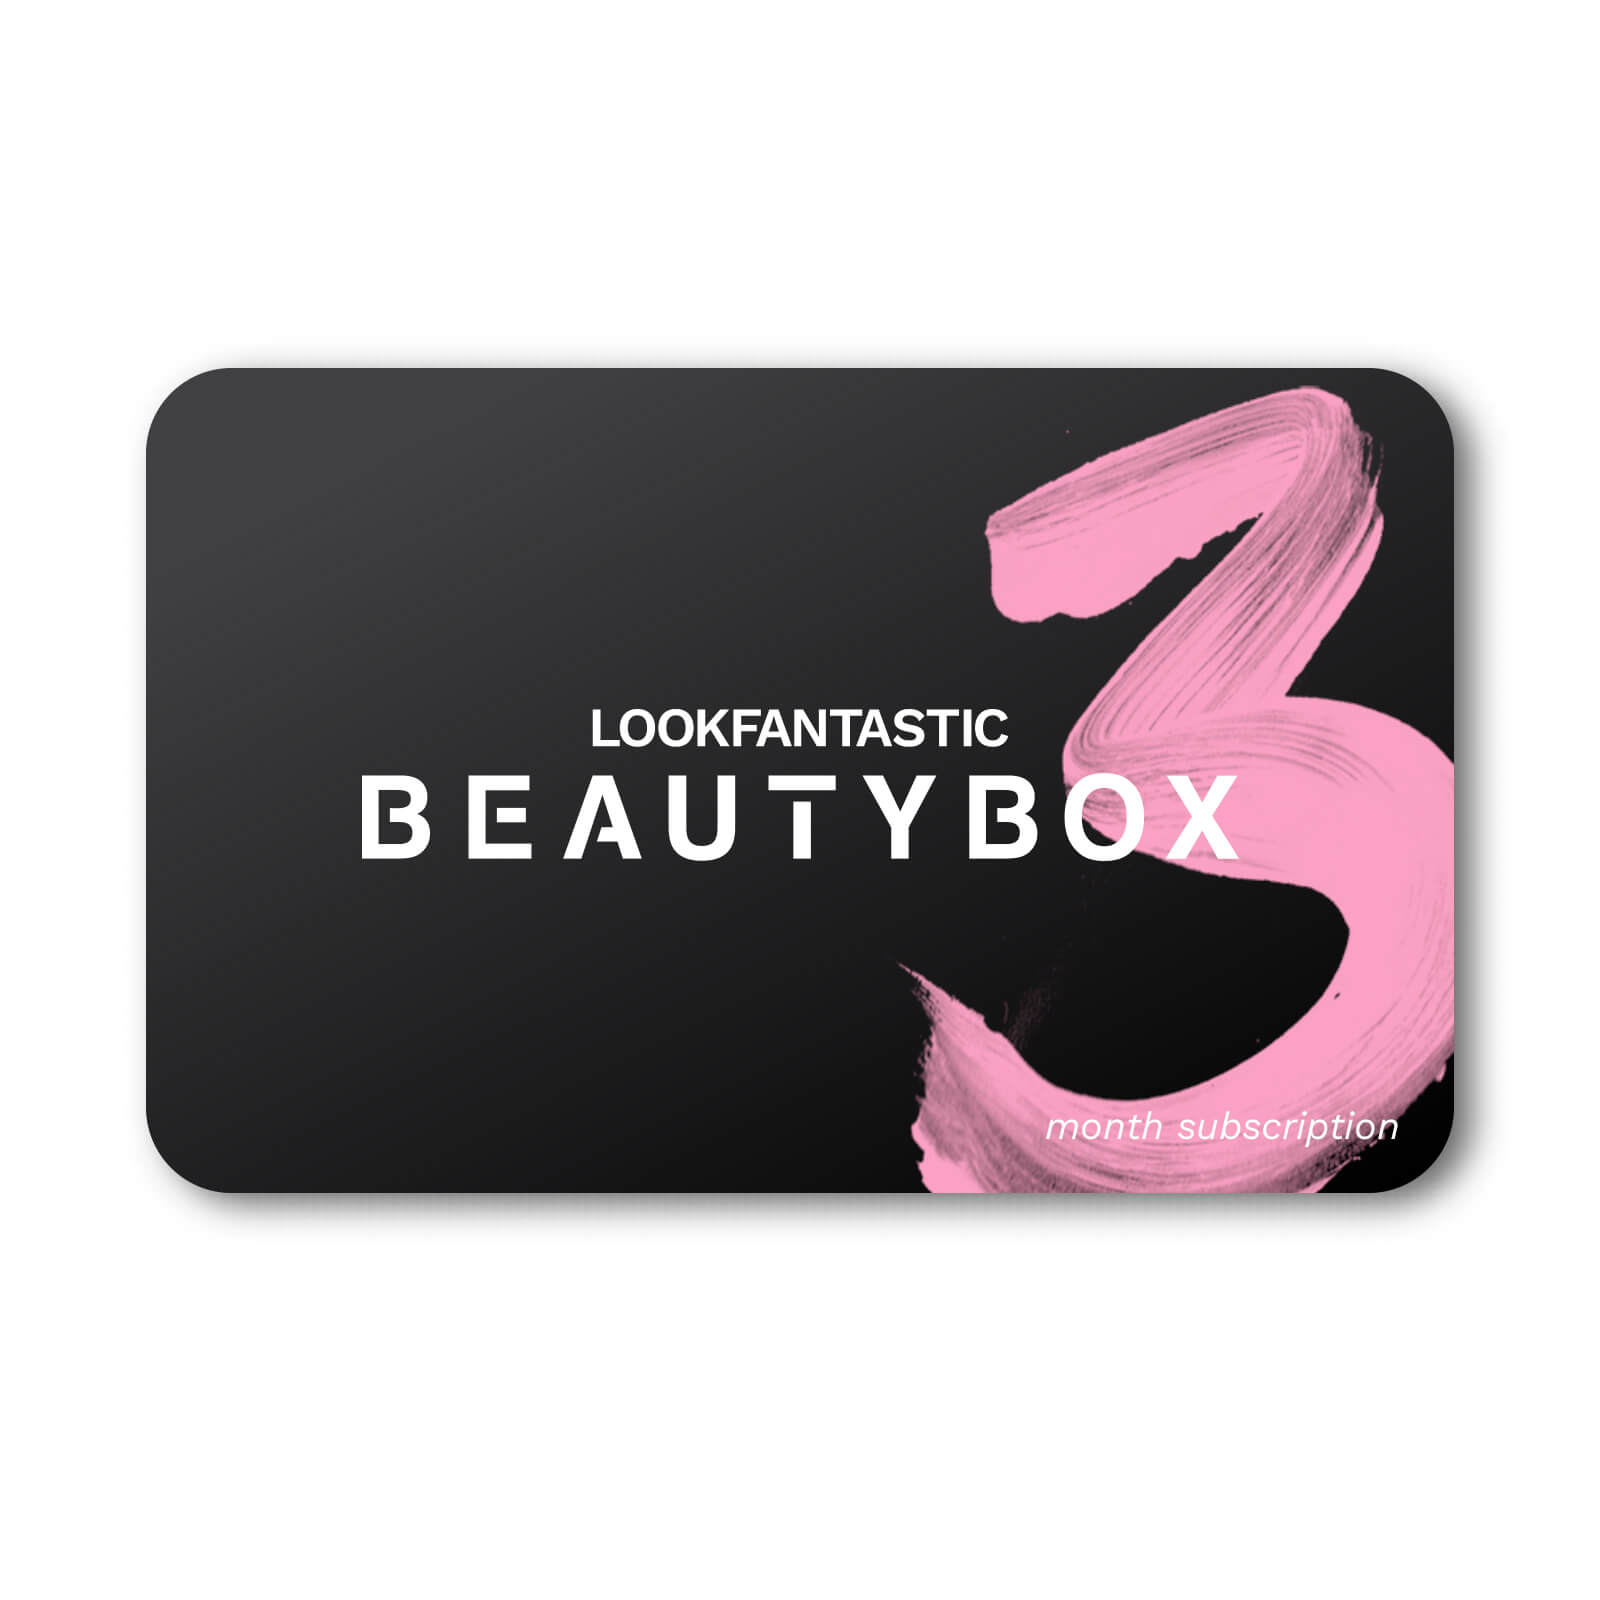 LOOKFANTASTIC Beauty Box 3 Month Subscription Gift Voucher